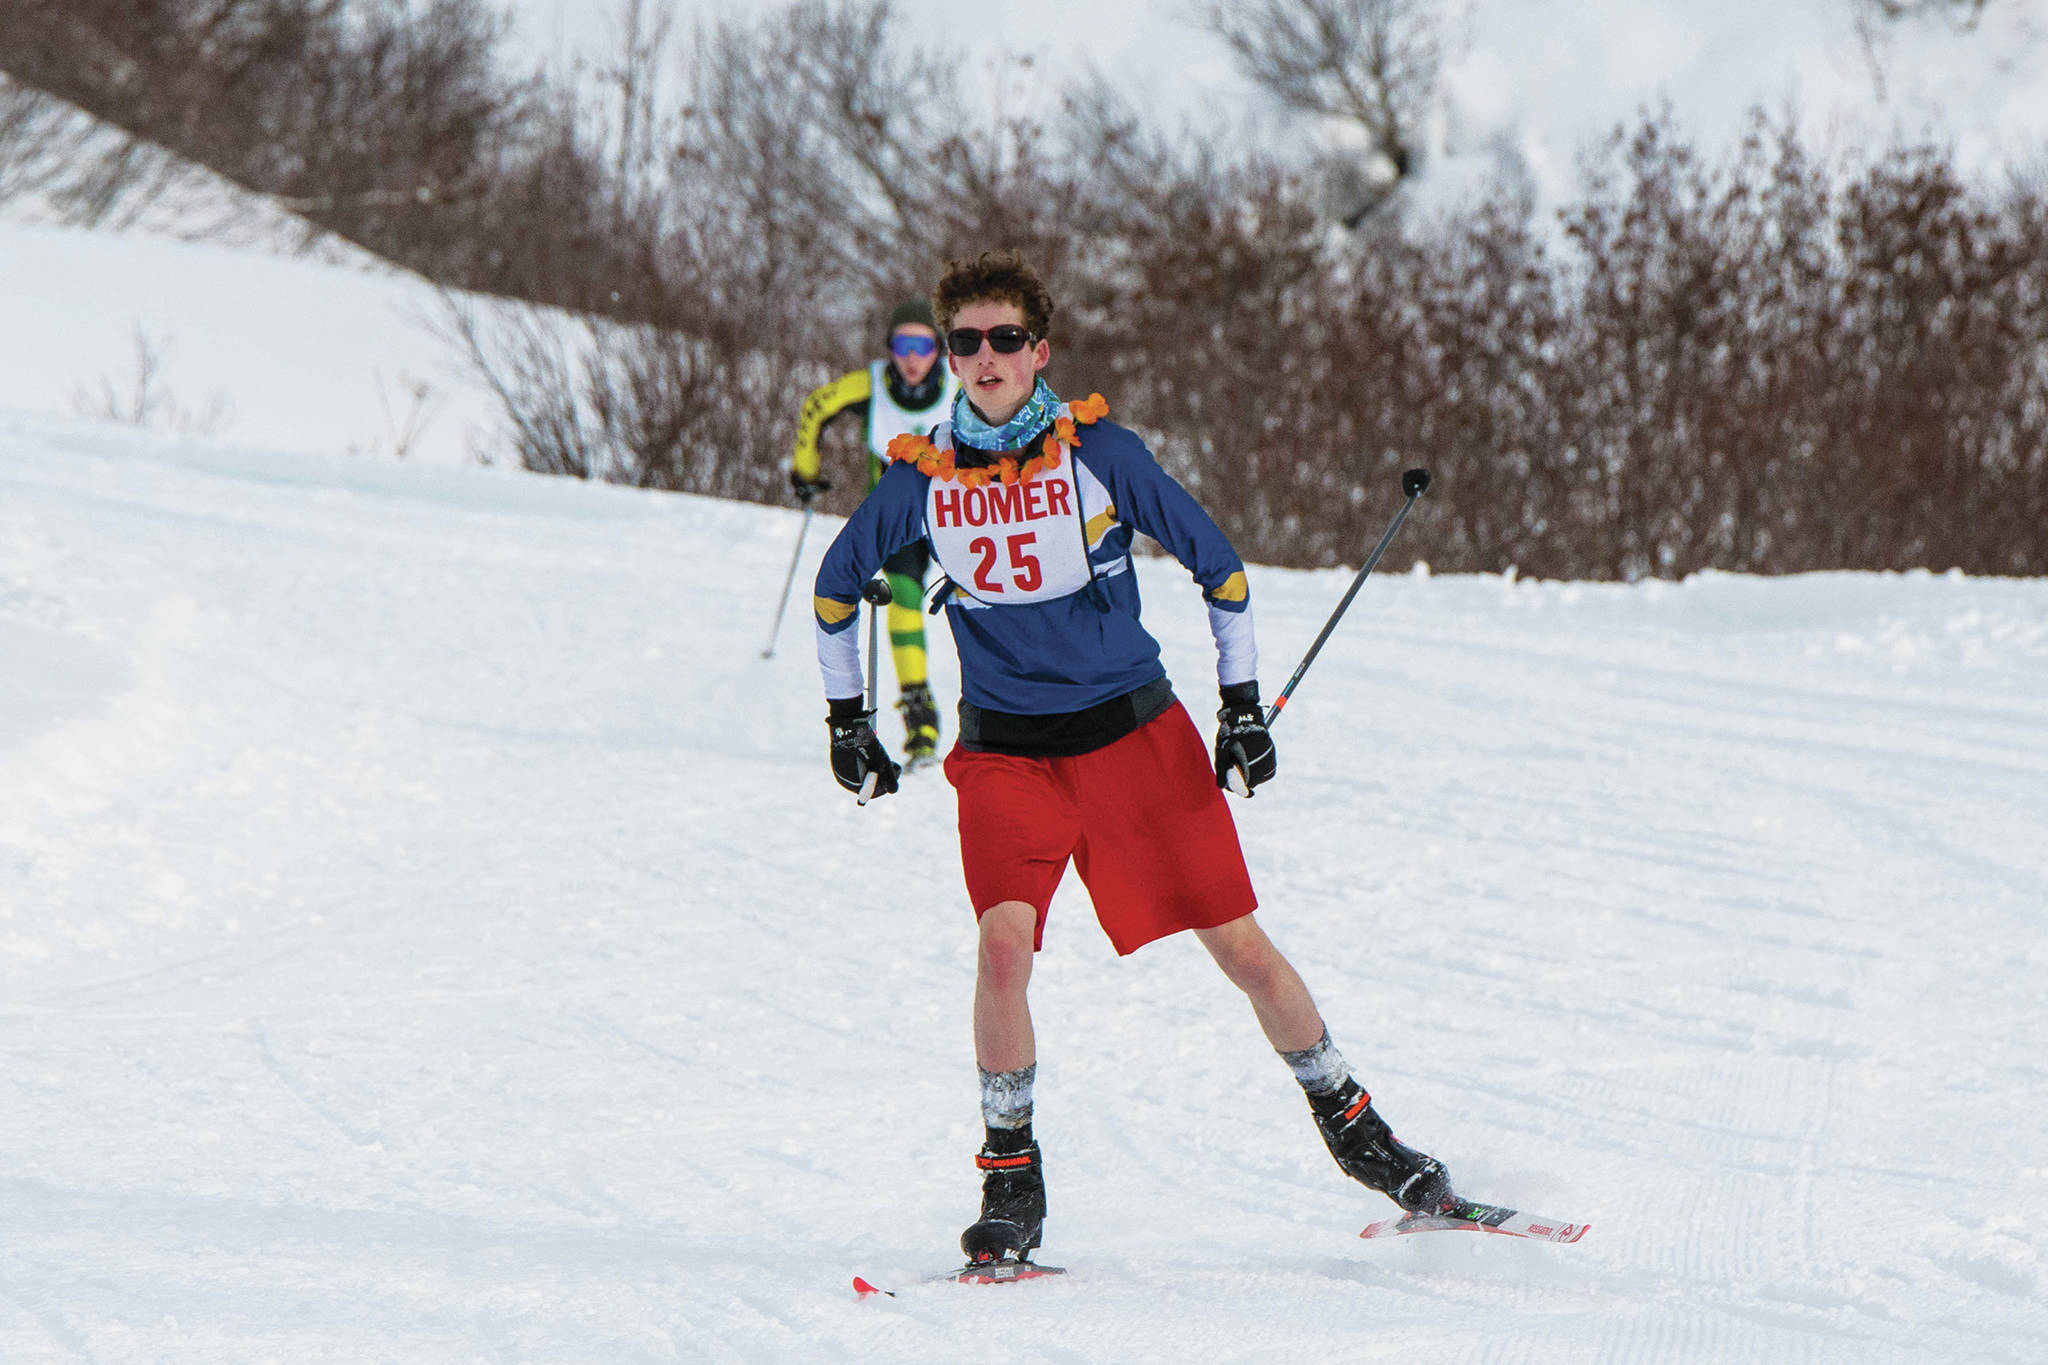 Homer’s Seamus McDonough skies the boys 5-kilometer classic race on Saturday, Feb. 13, 2021 at the Lookout Mountain Trails near Homer, Alaska. (Photo by Debbie Delker)